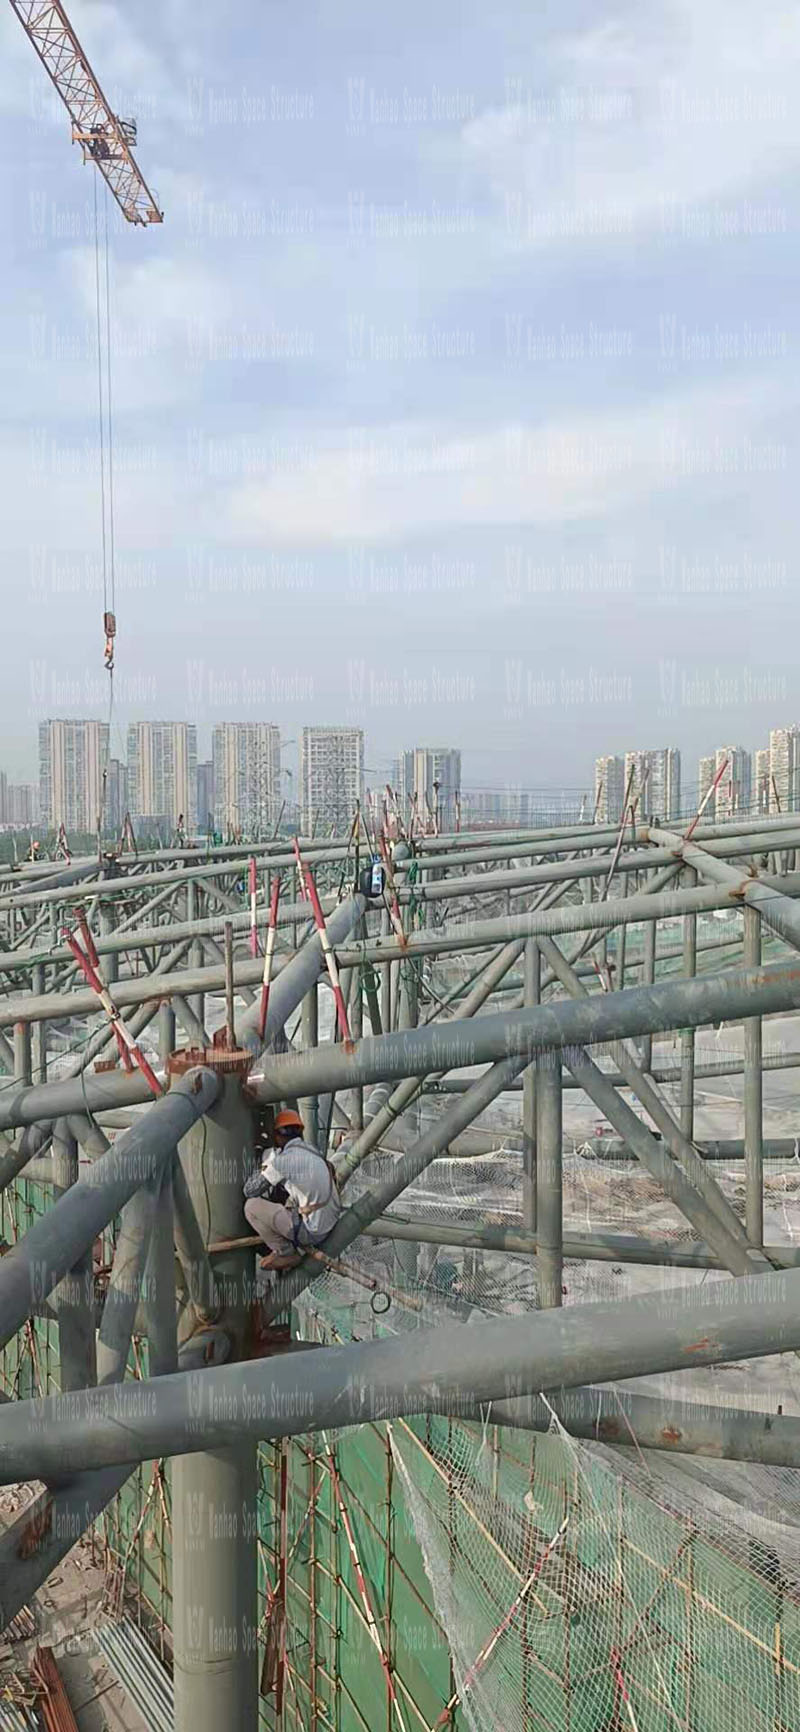 Construction of the membrane structure project of the Hangzhou Asian Games baseball (soft) ball sports and cultural center begins